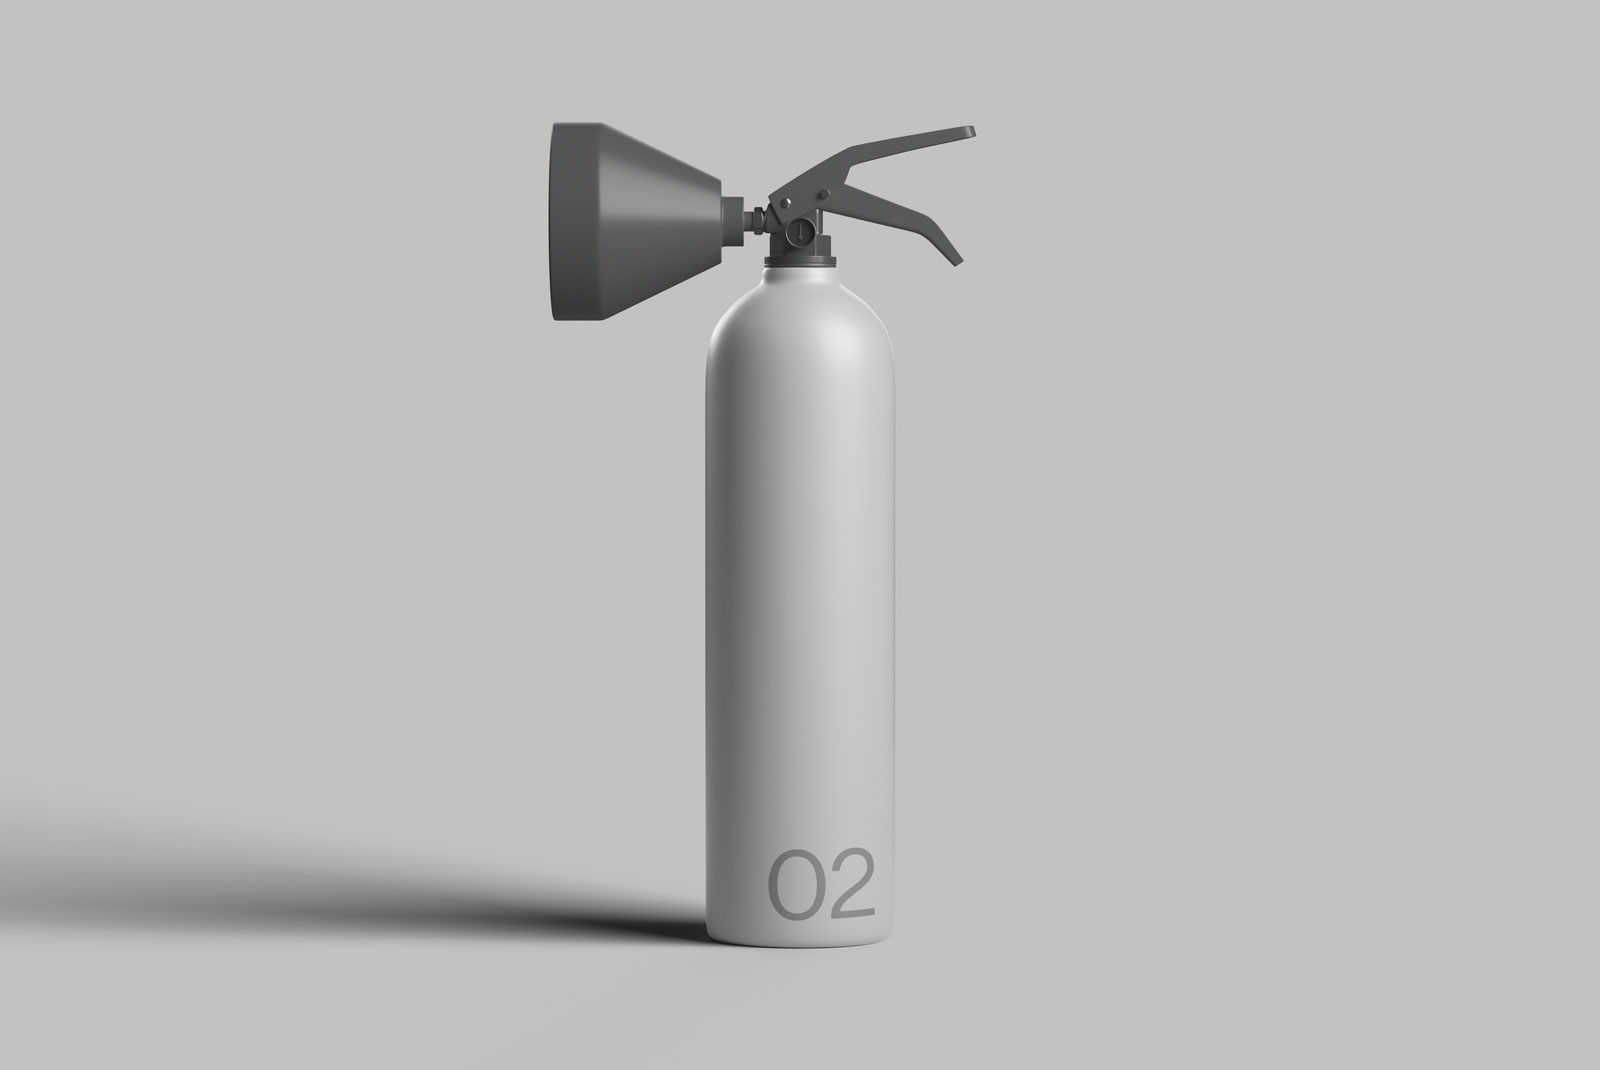 3D Product mockup of a sleek fire extinguisher design on a clean background, perfect for presentations and advertising visuals.